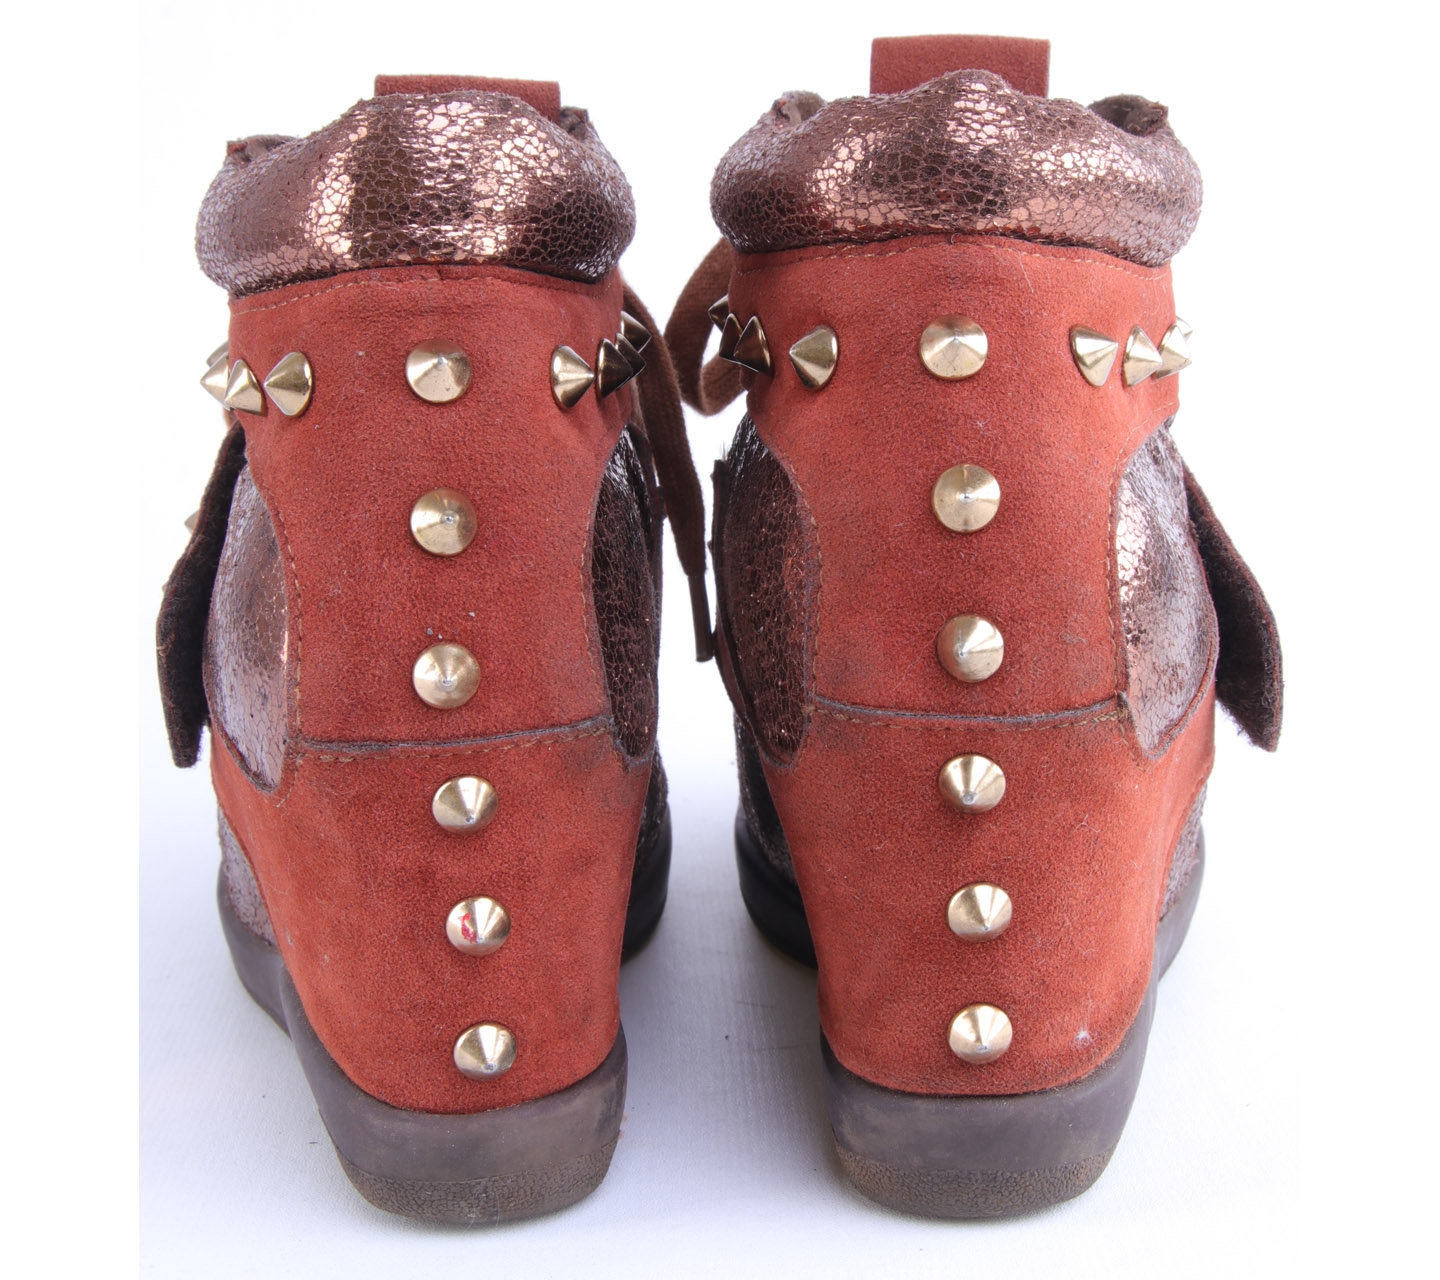 Gosh Brown Studded Boots